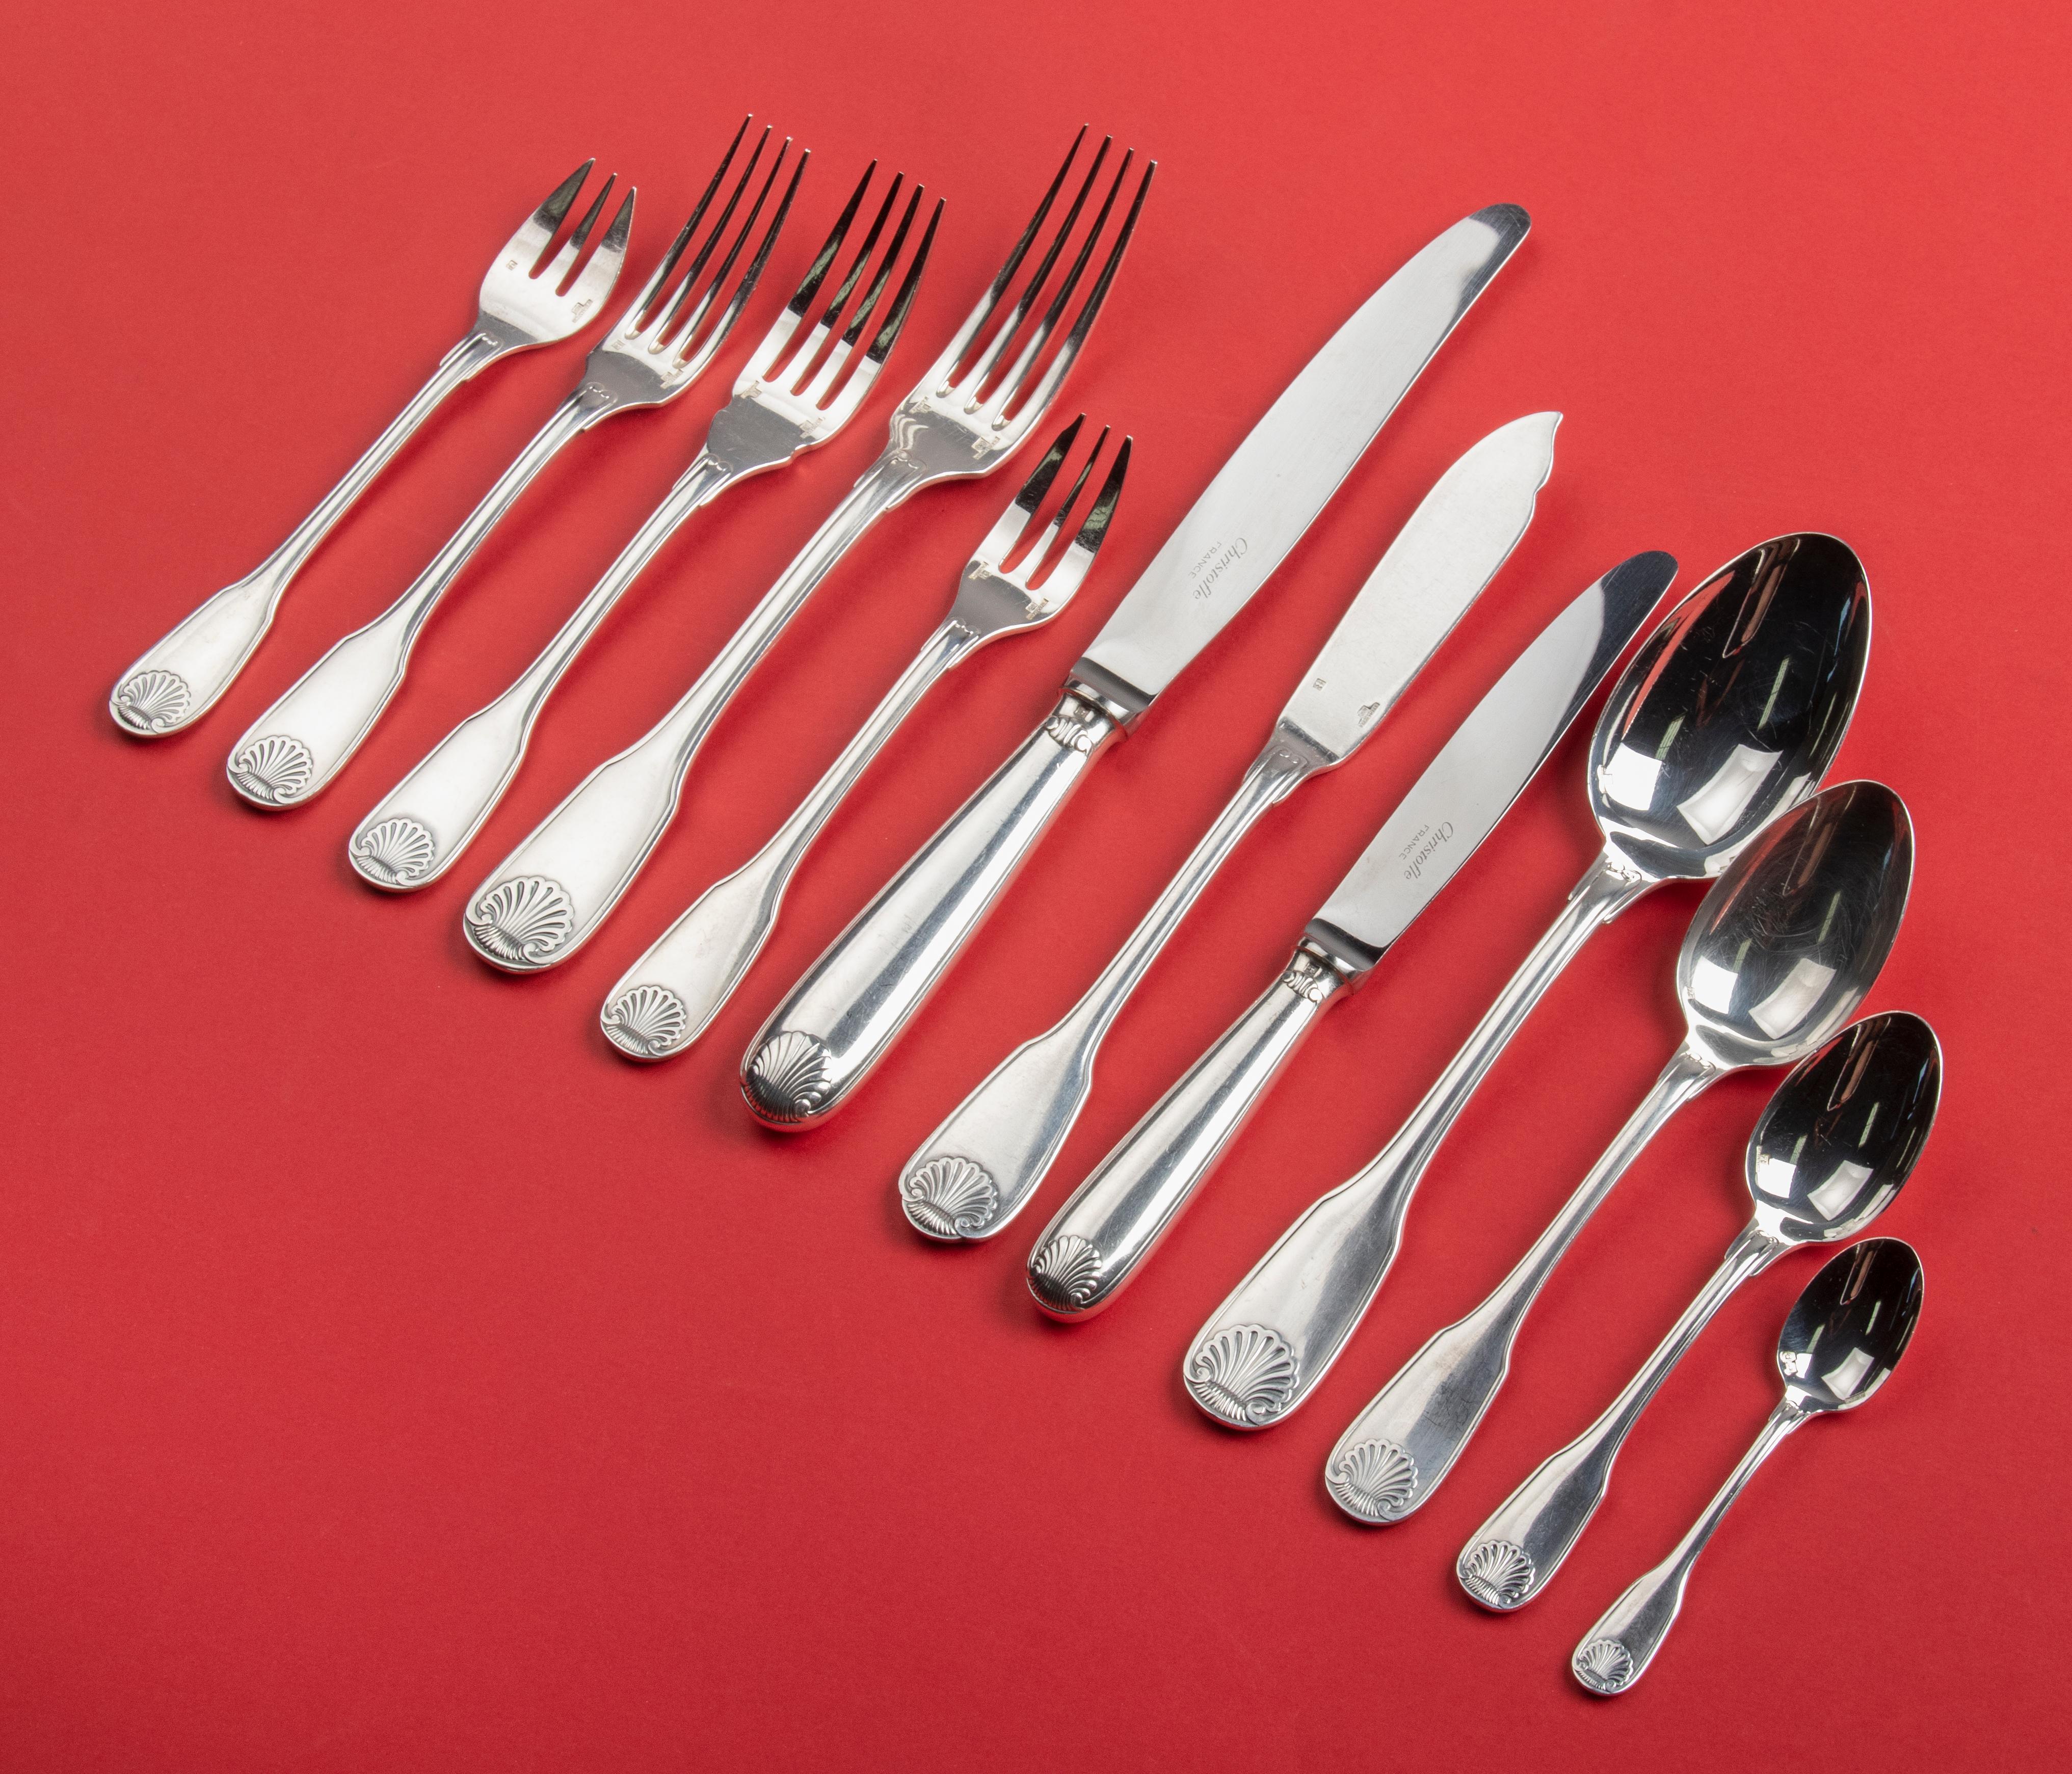 Great set of silver plated cutlery from the French brand Christofle. The cutlery is for 12 people and very complete, with many types of serving cutlery. 115 parts in total. The model is Vendome, also called Coquille. A classic and timeless decor